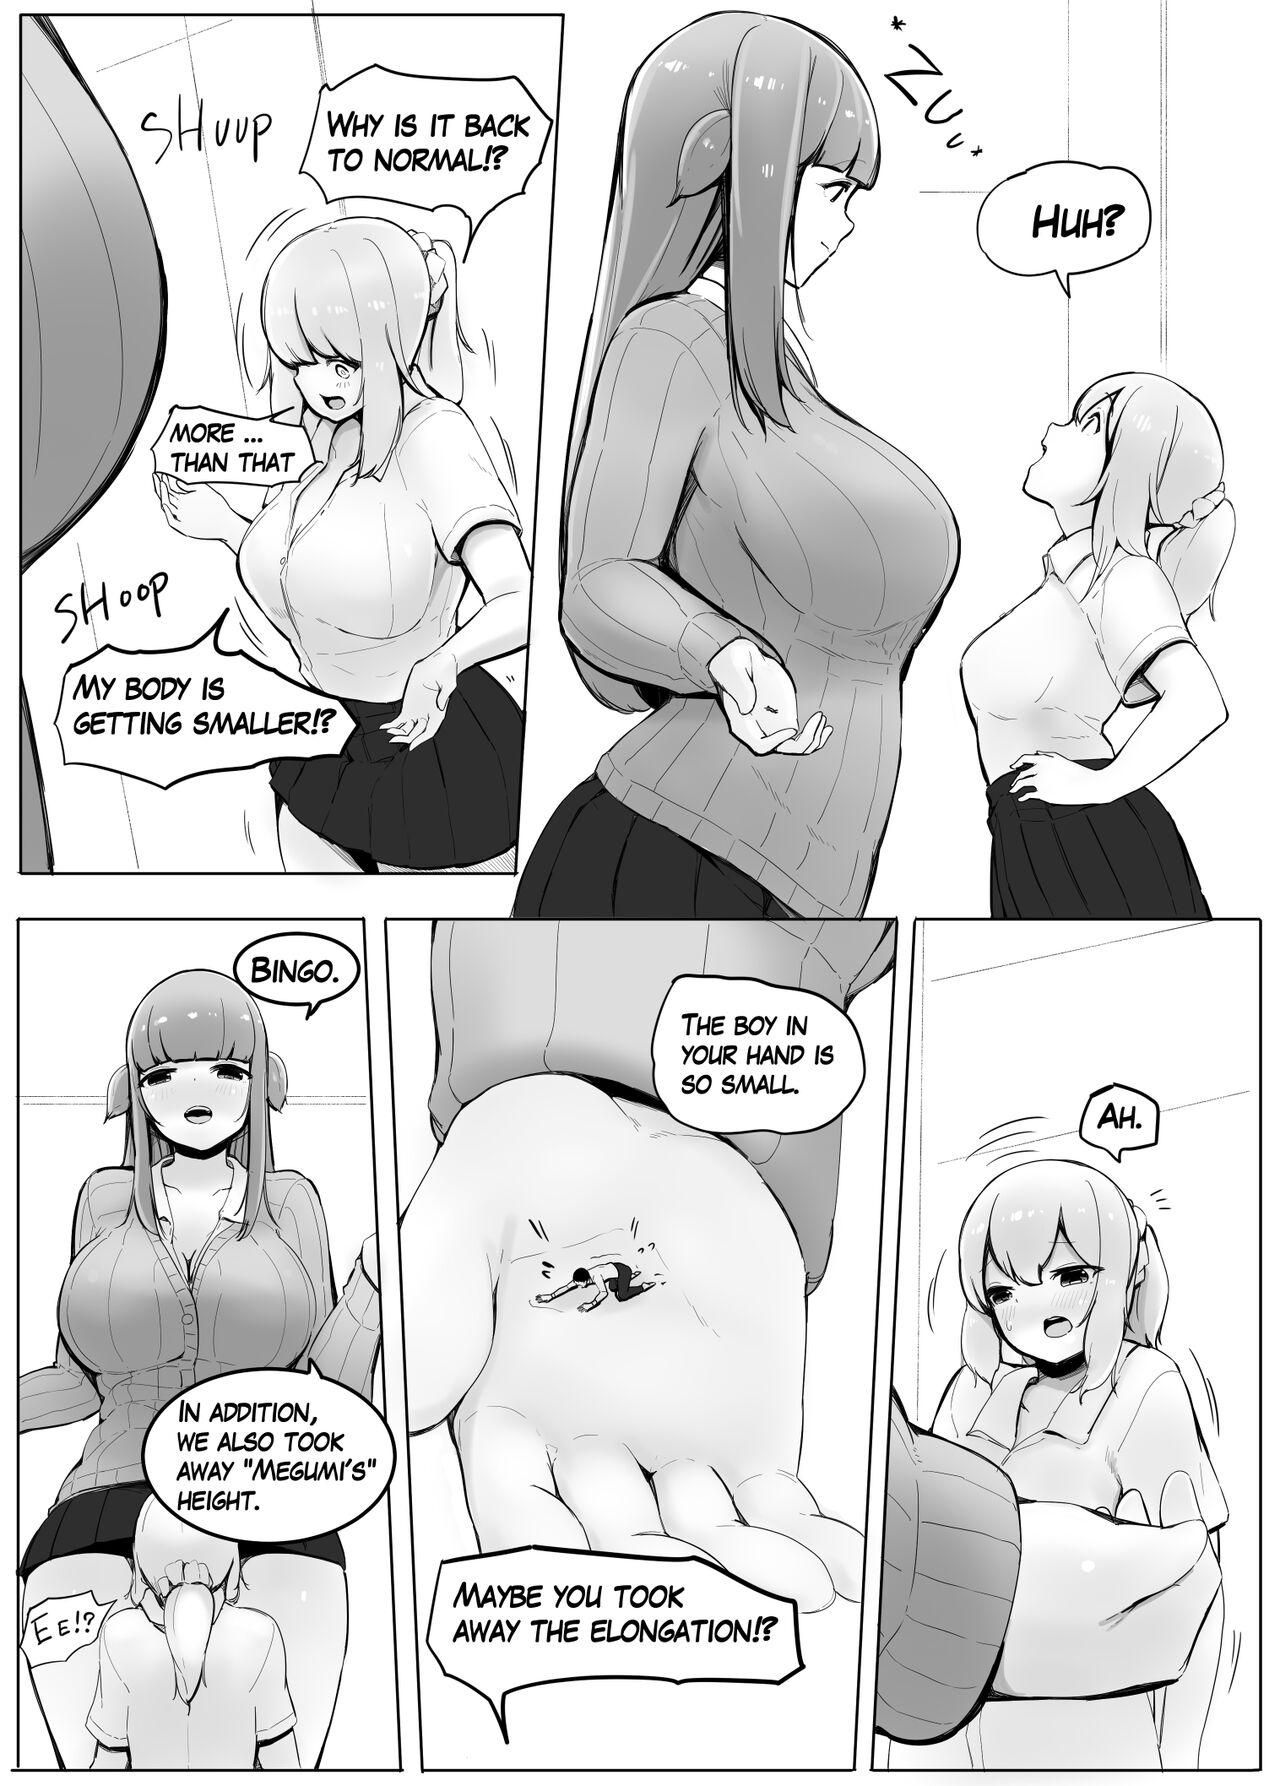 Putinha The Girl Takes My Height. 2 Speculum - Page 3